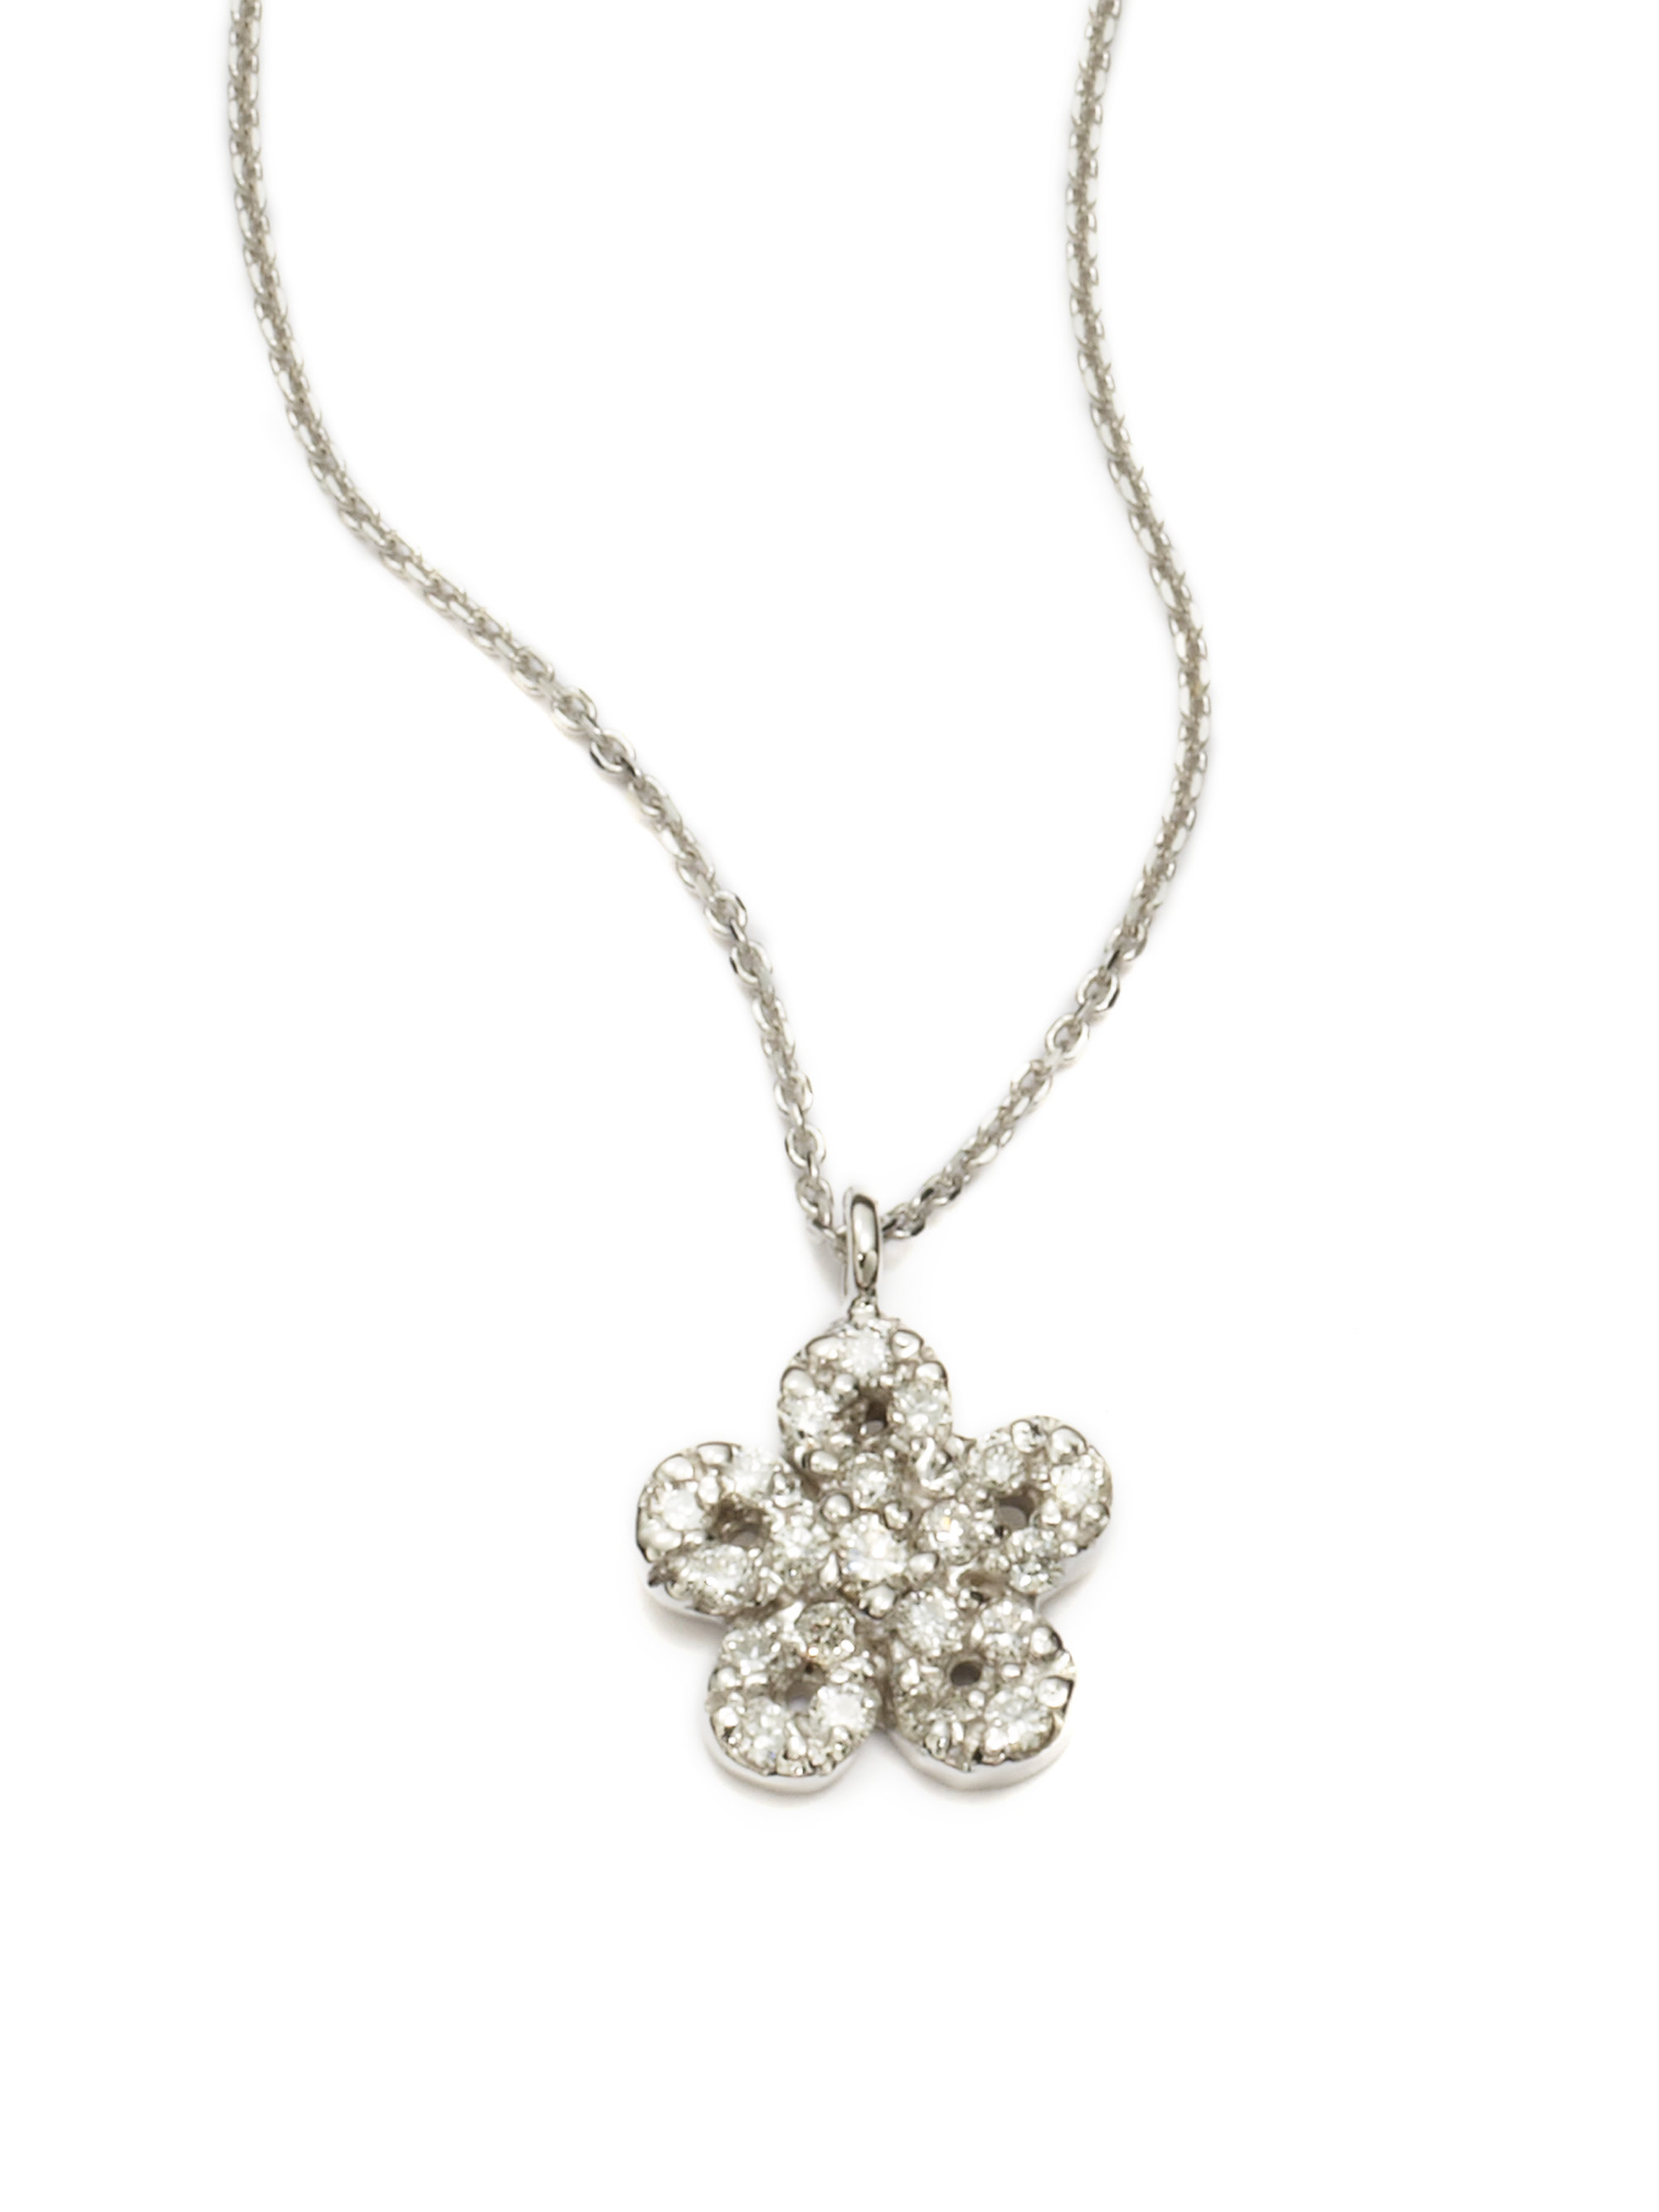 Kc Designs Diamond Flower Pendant Necklace in Gold (white gold)